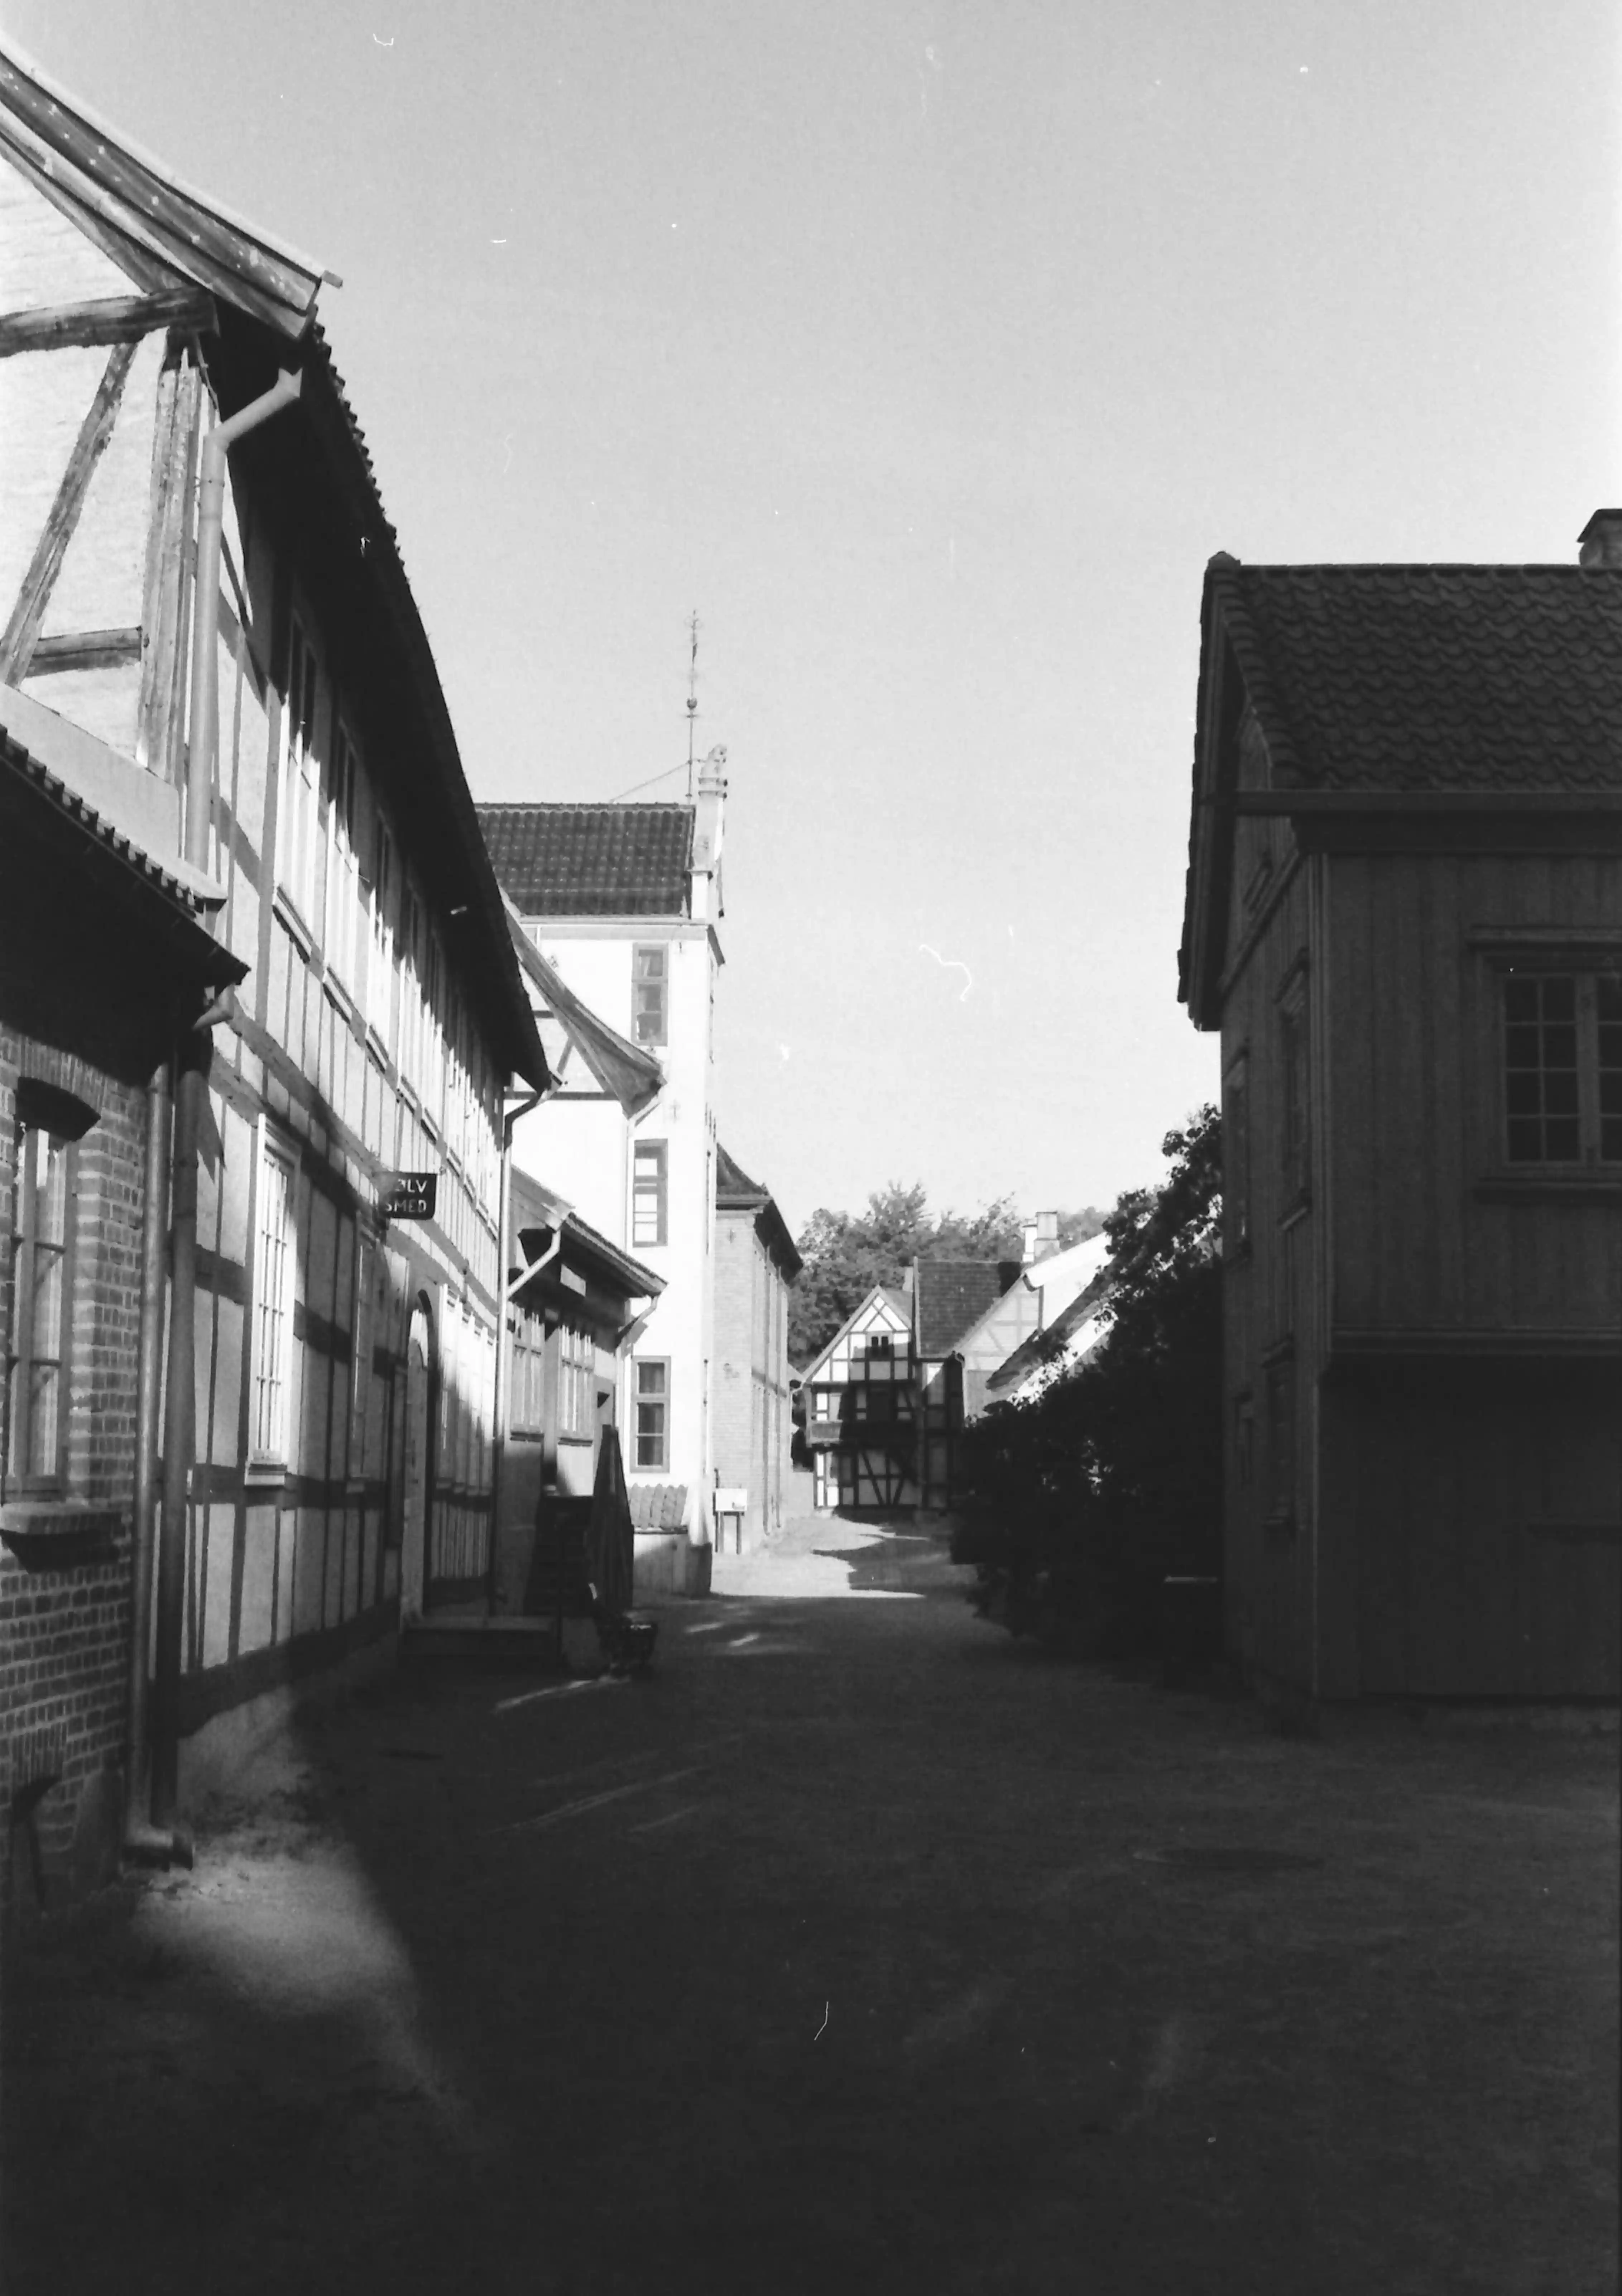 Black and white picture of a street in between historical Norwegian wooden houses